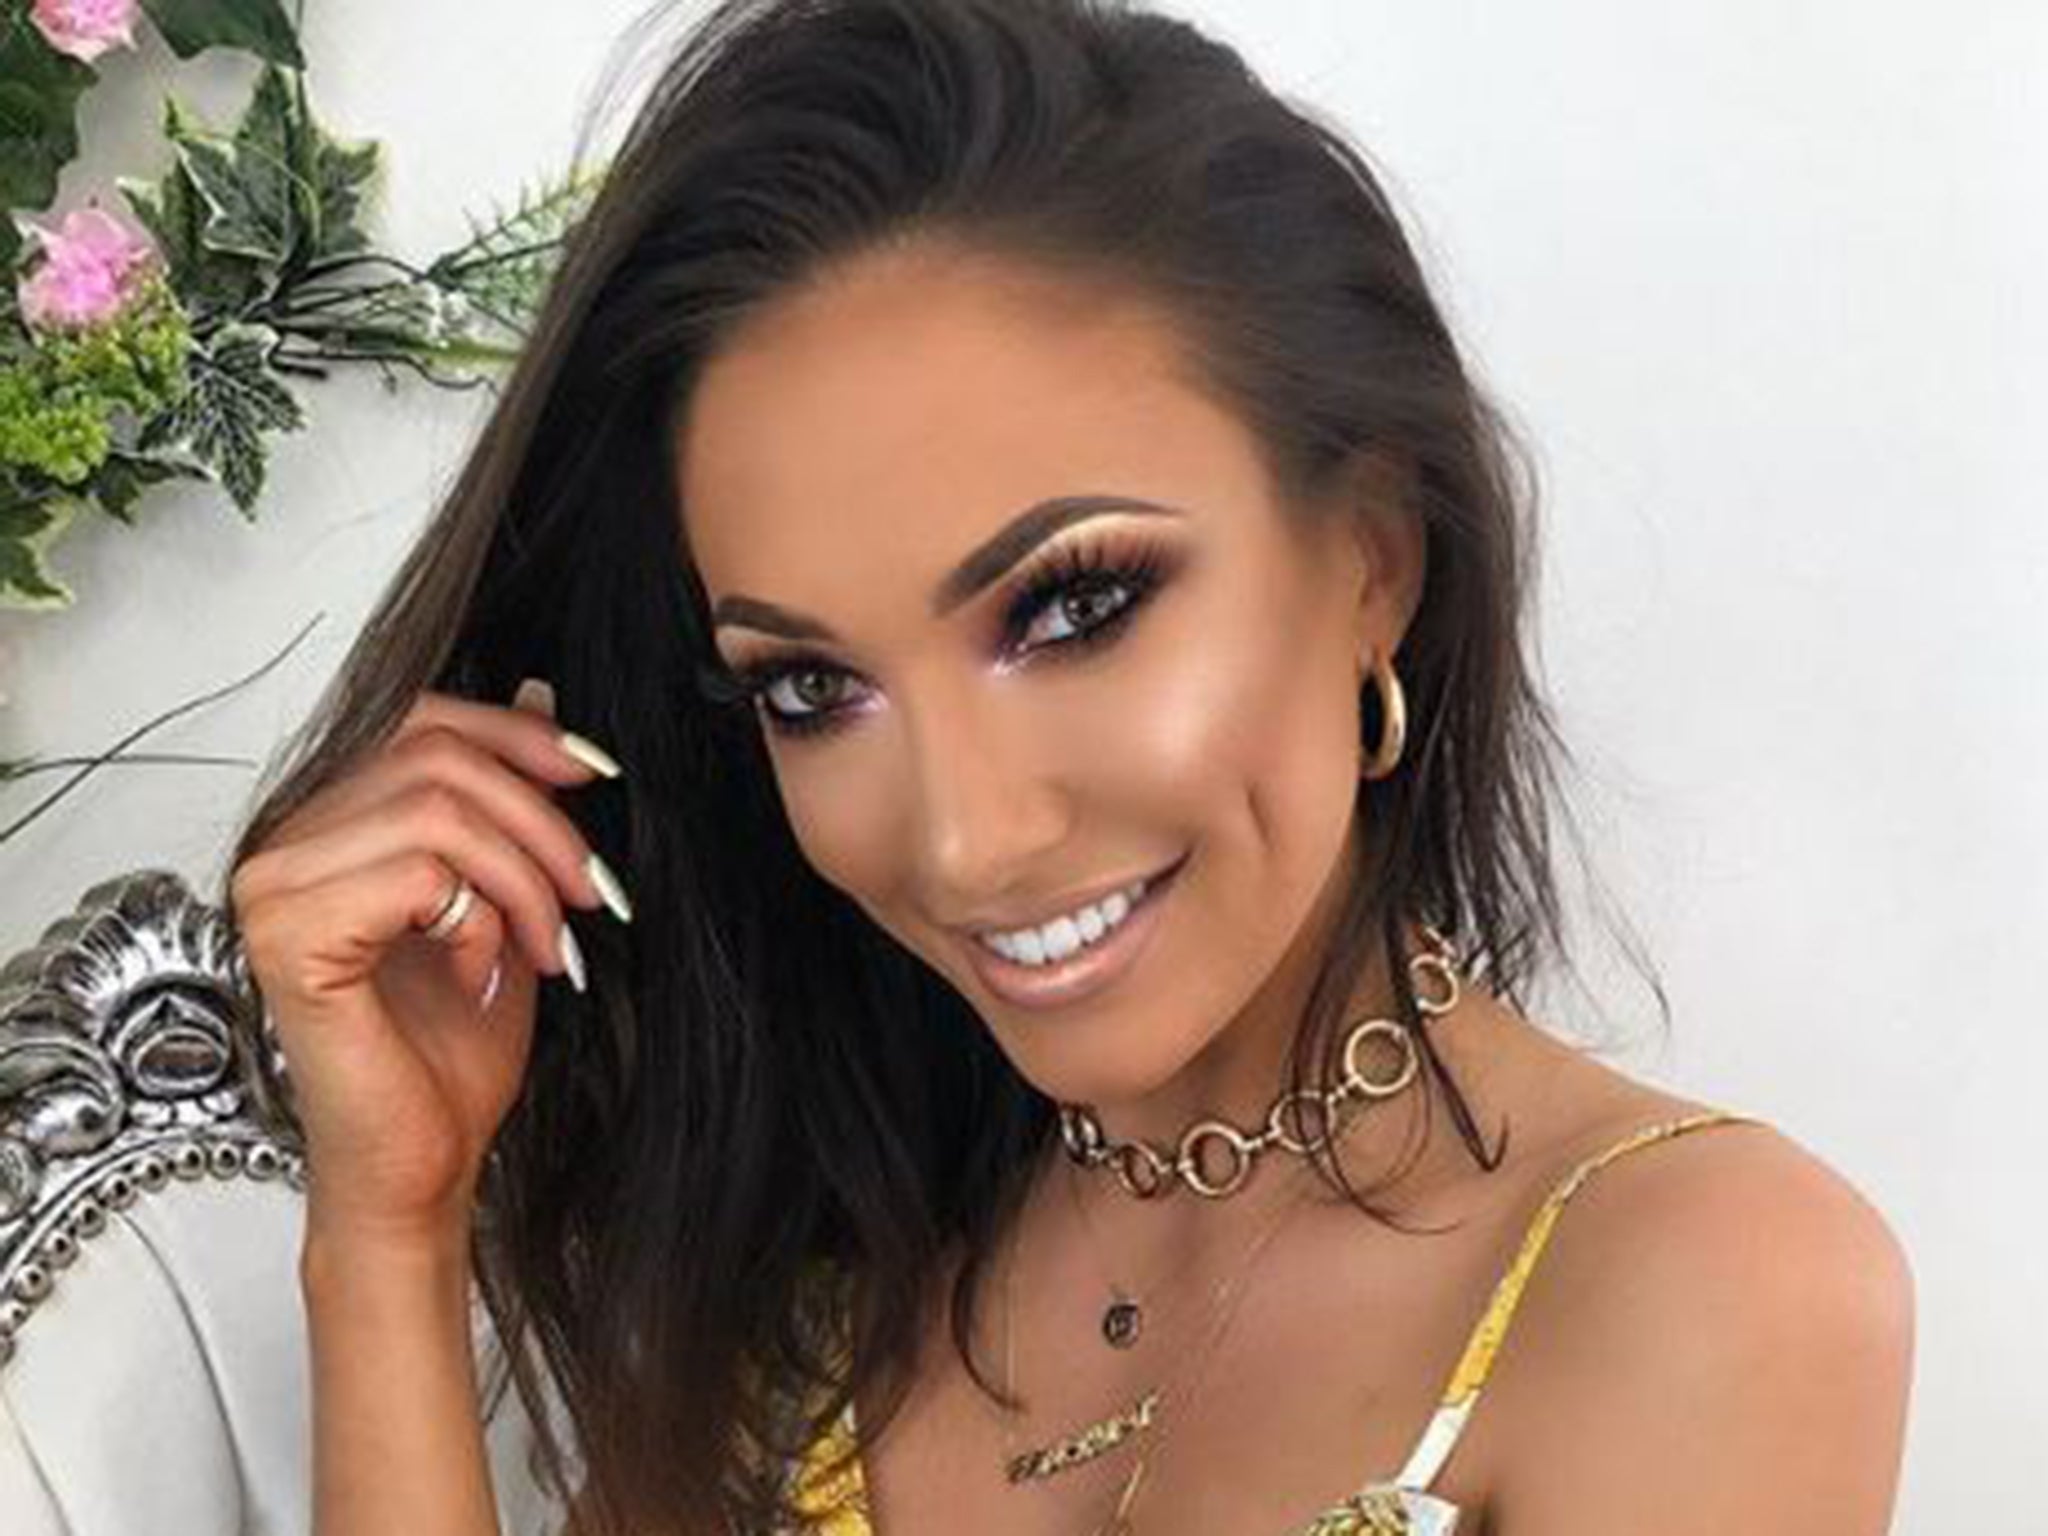 Sophie Gradon, who died this week, appeared on 'Love Island' in 2016